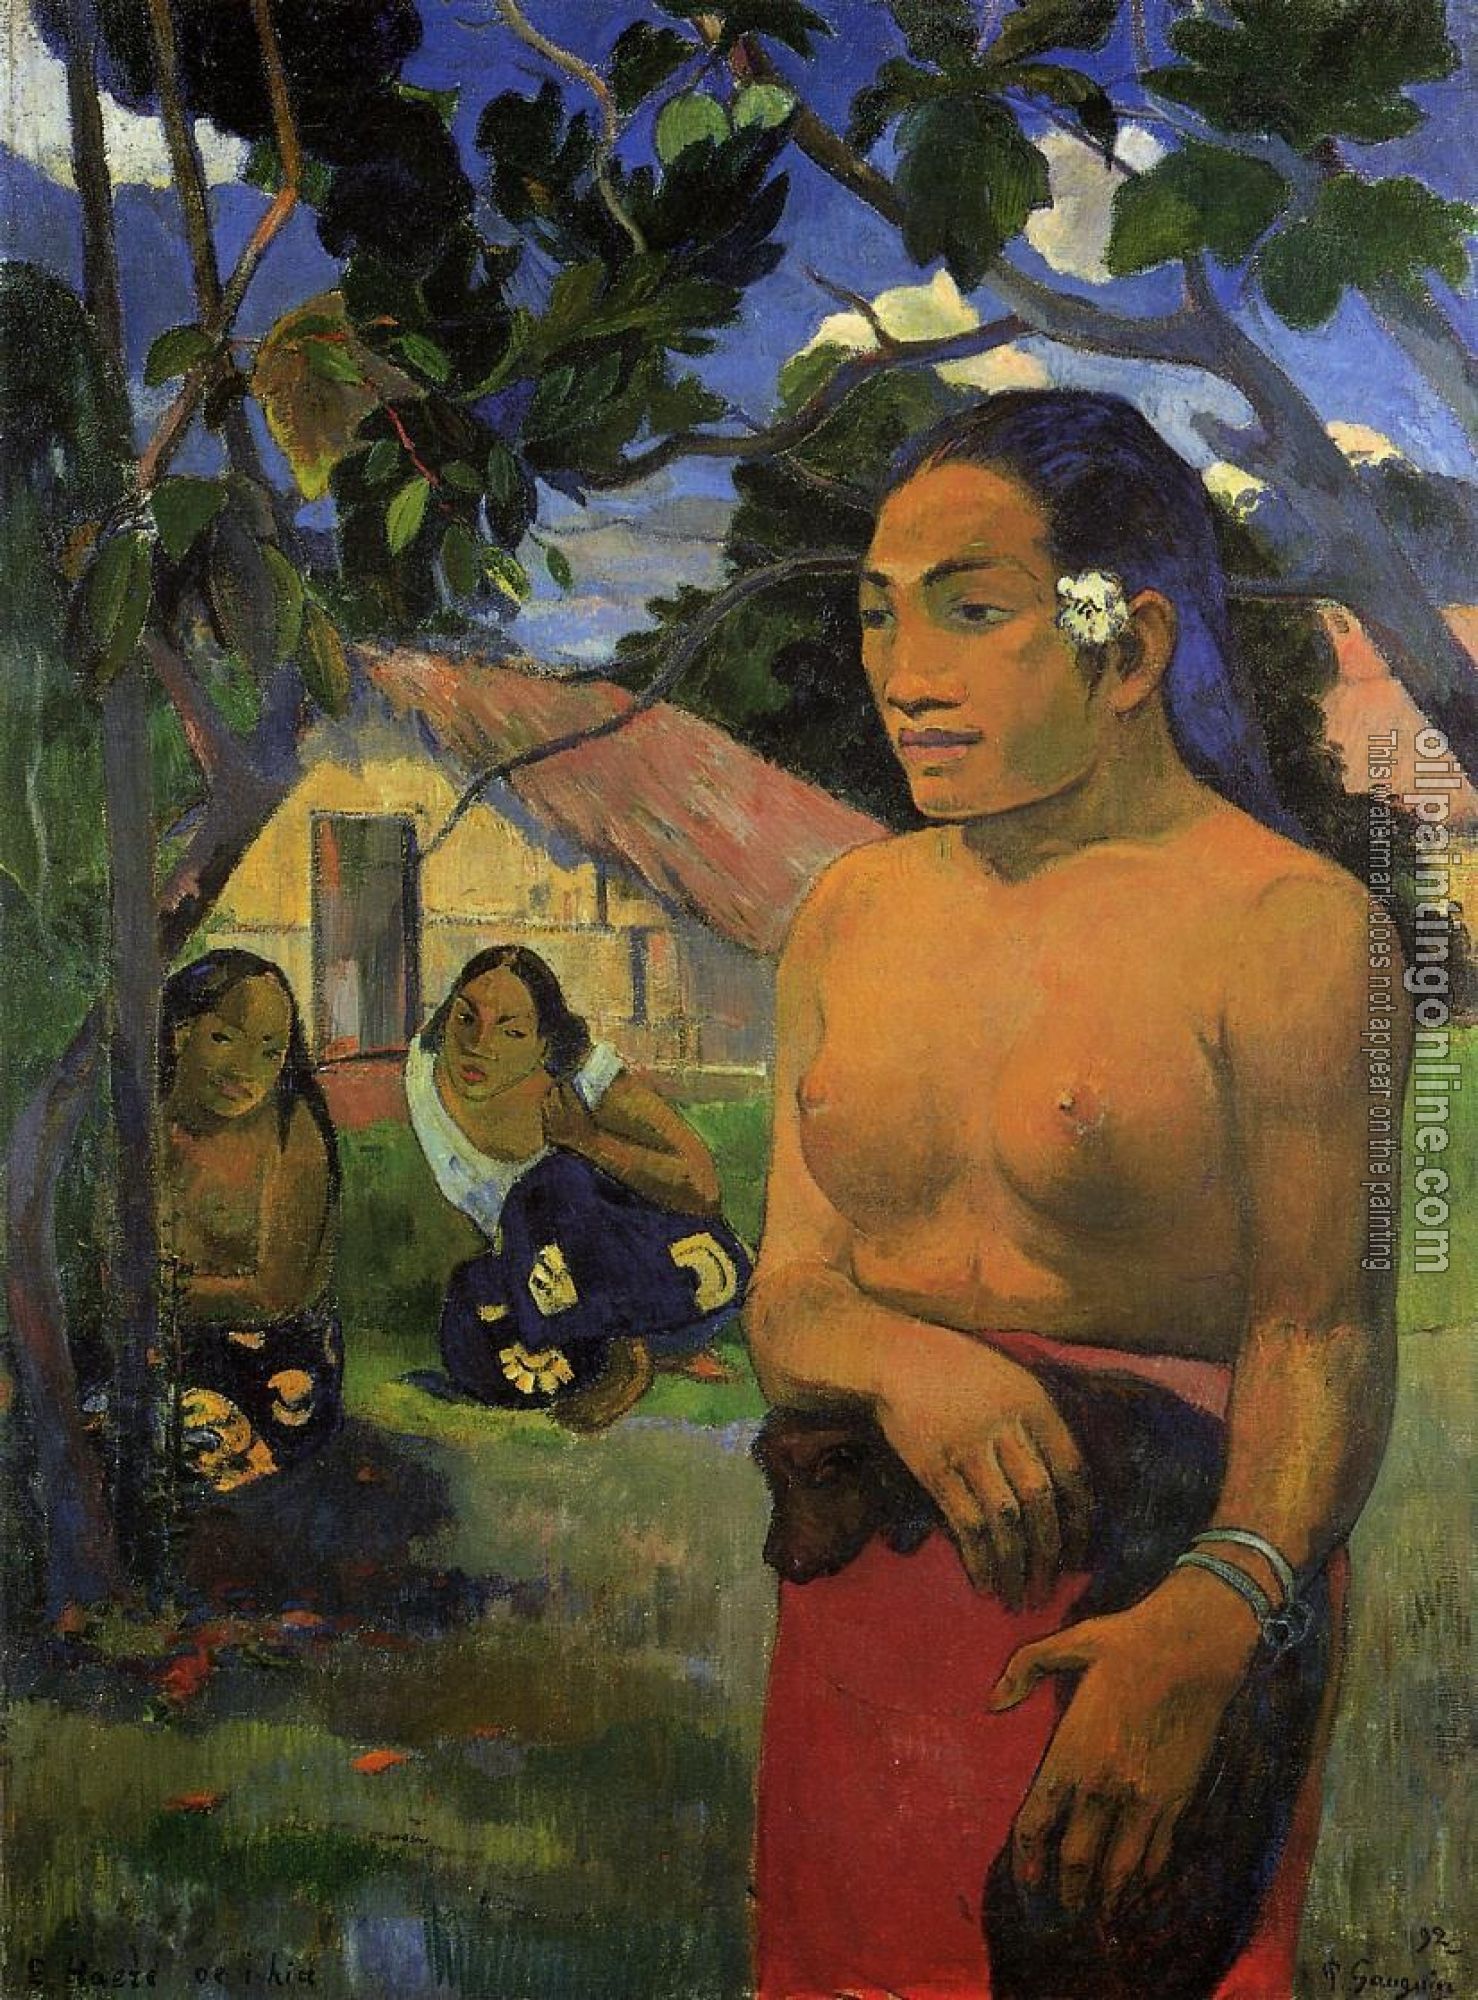 Gauguin, Paul - Where Are You Going